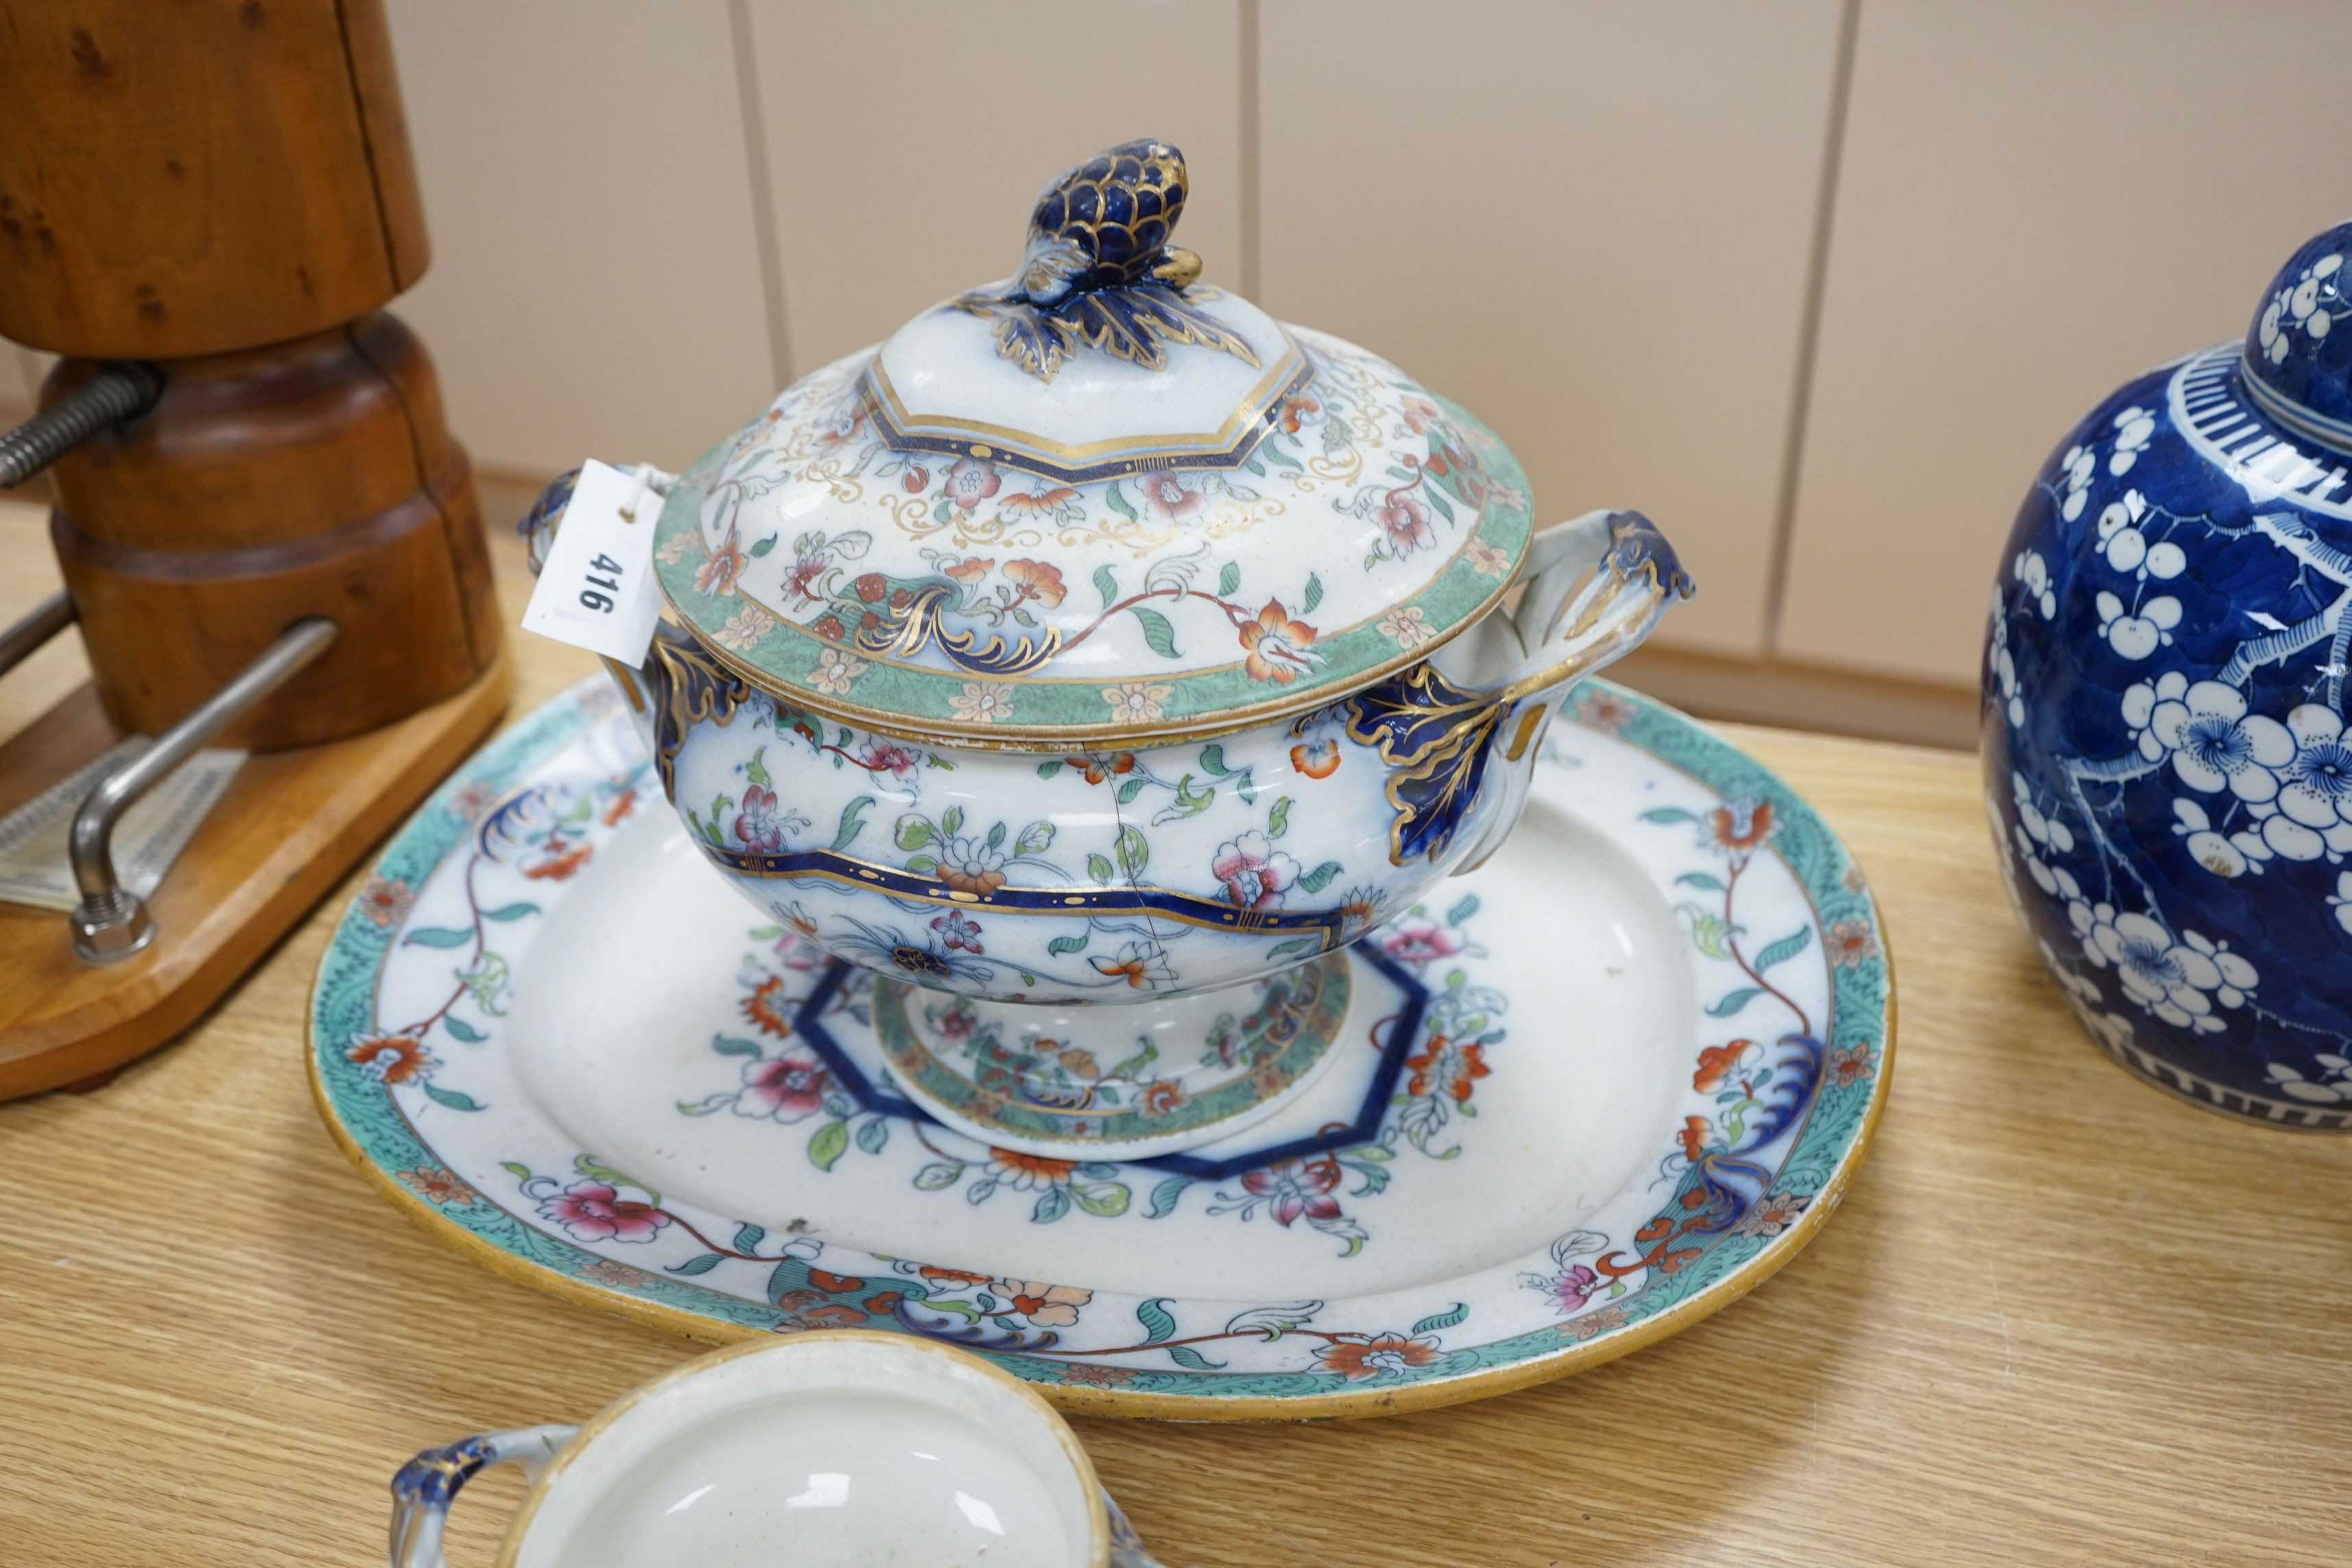 A mid 19th century Staffordshire pottery lidded soup tureen and cover (base cracked), a large meat dish and a sauce tureen (lacking lid) (3)